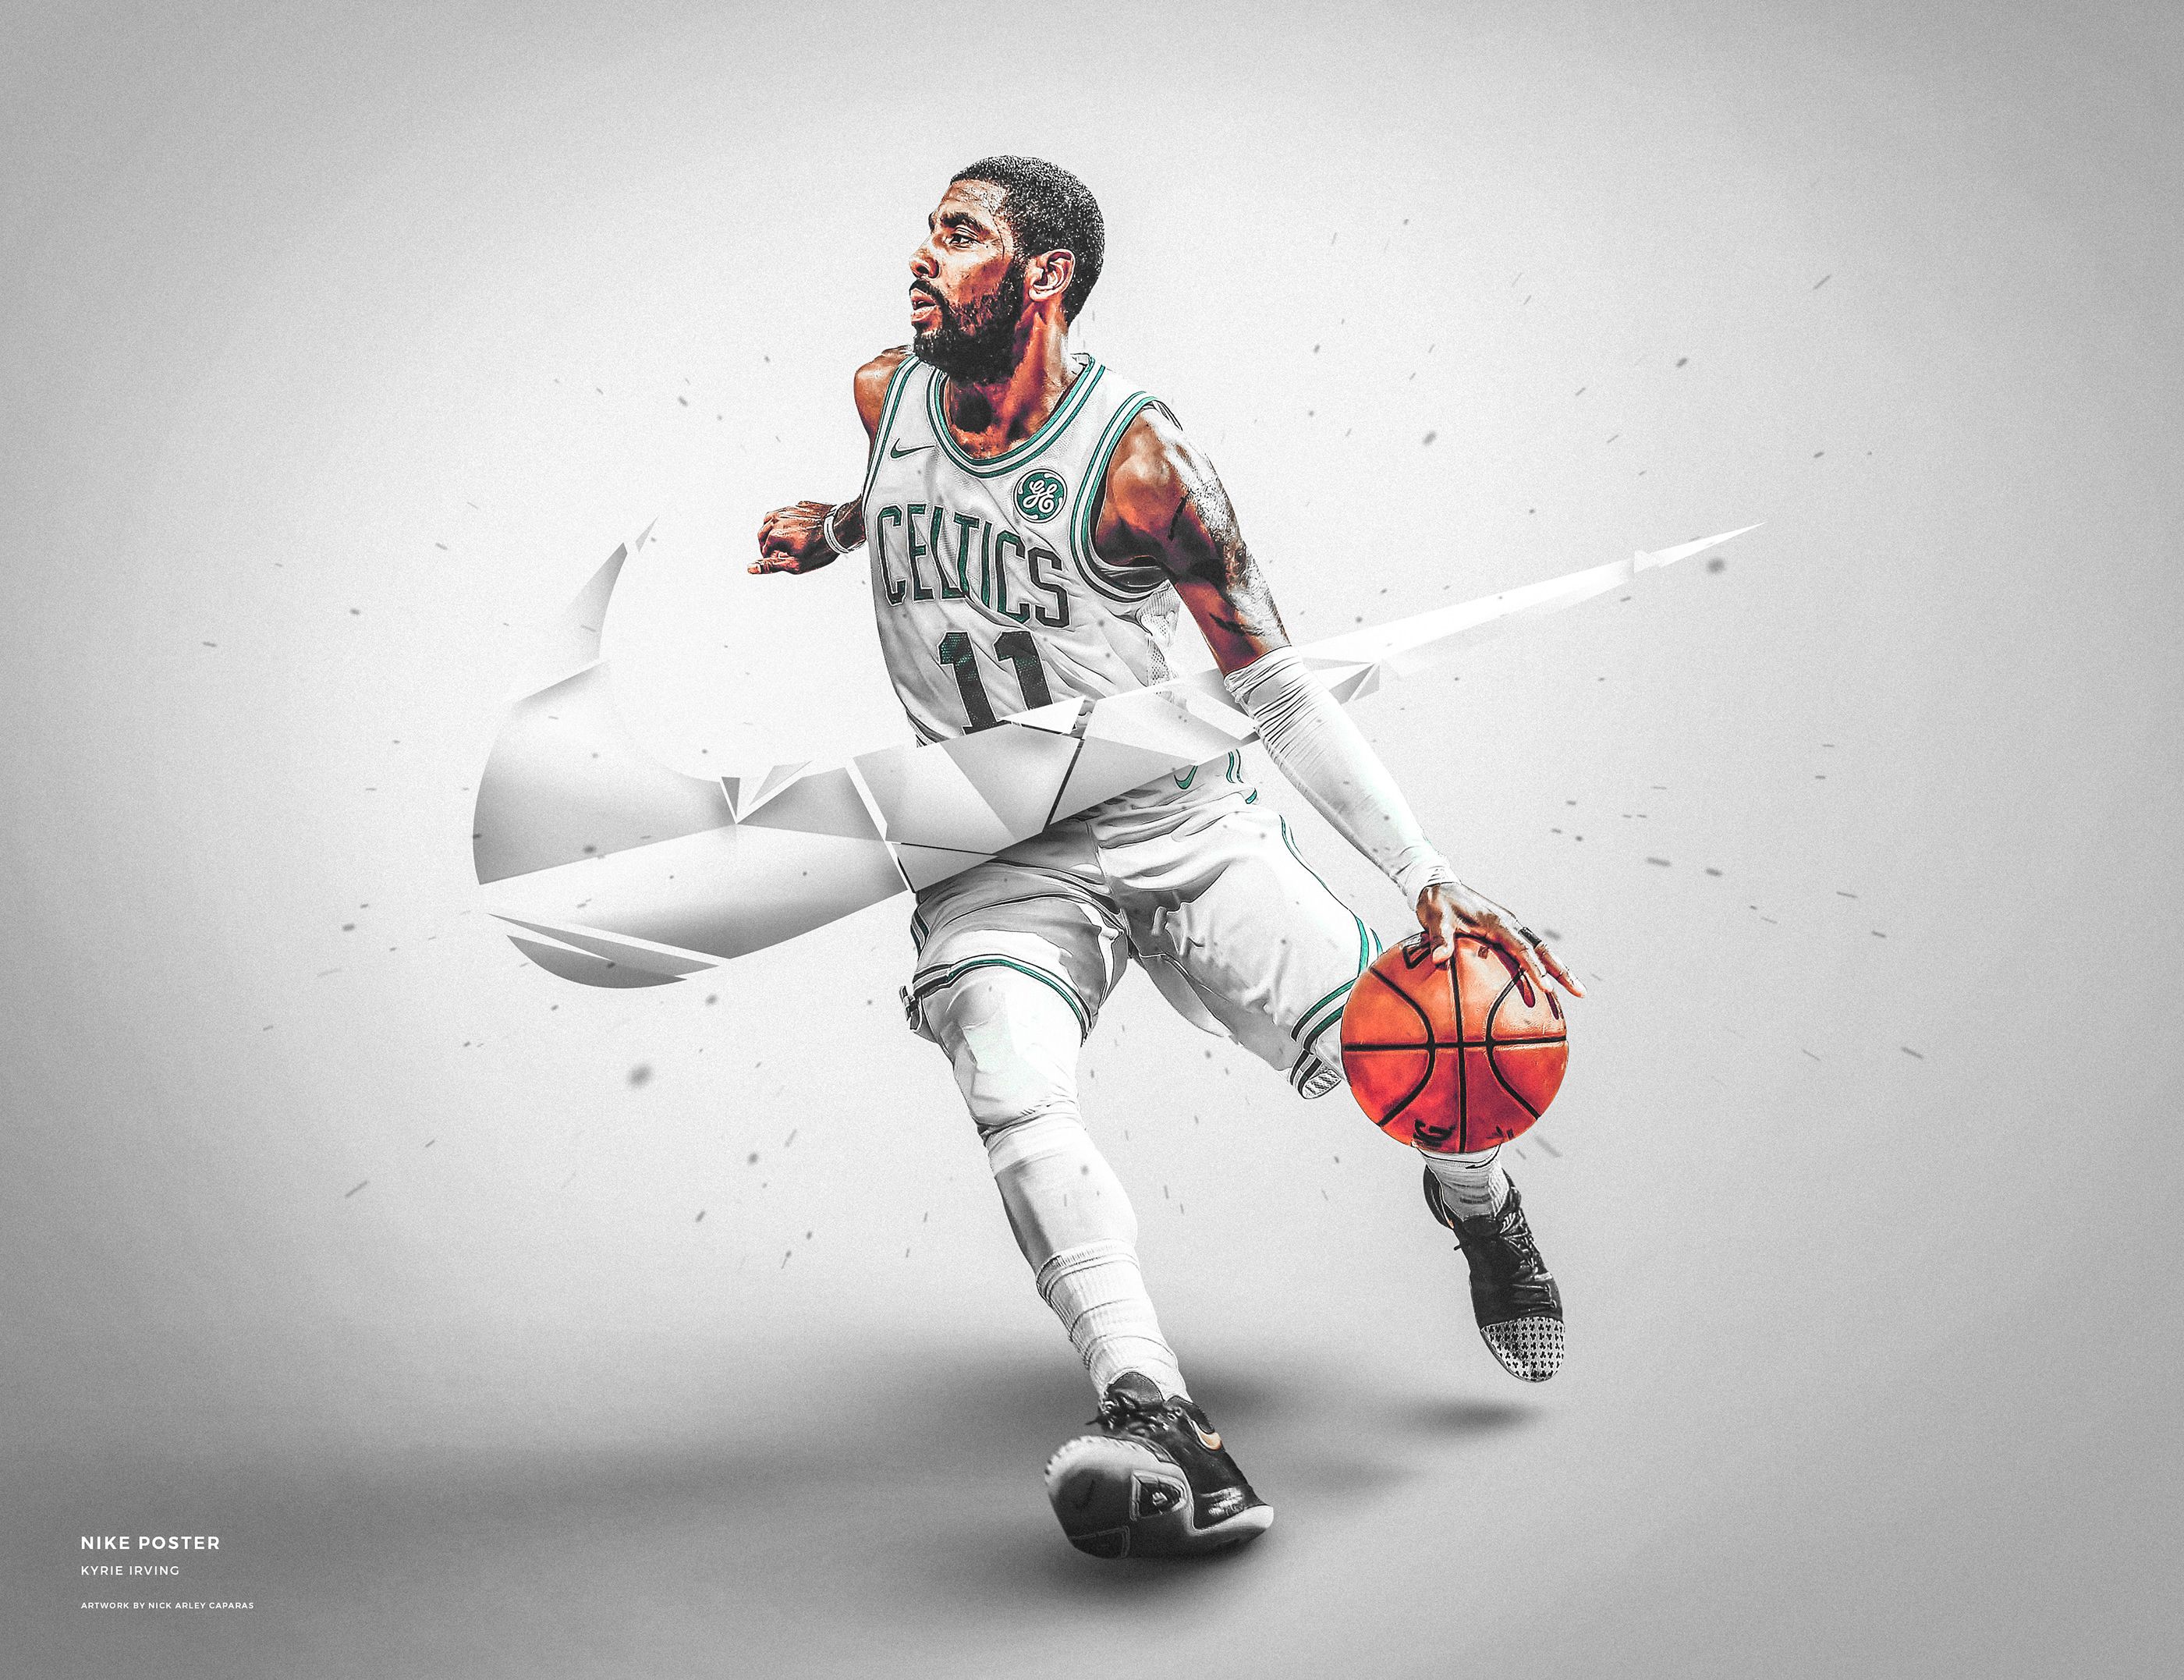 Nike Wallpaper Kyrie Irving PCMaciPhoneAndroid on Behance